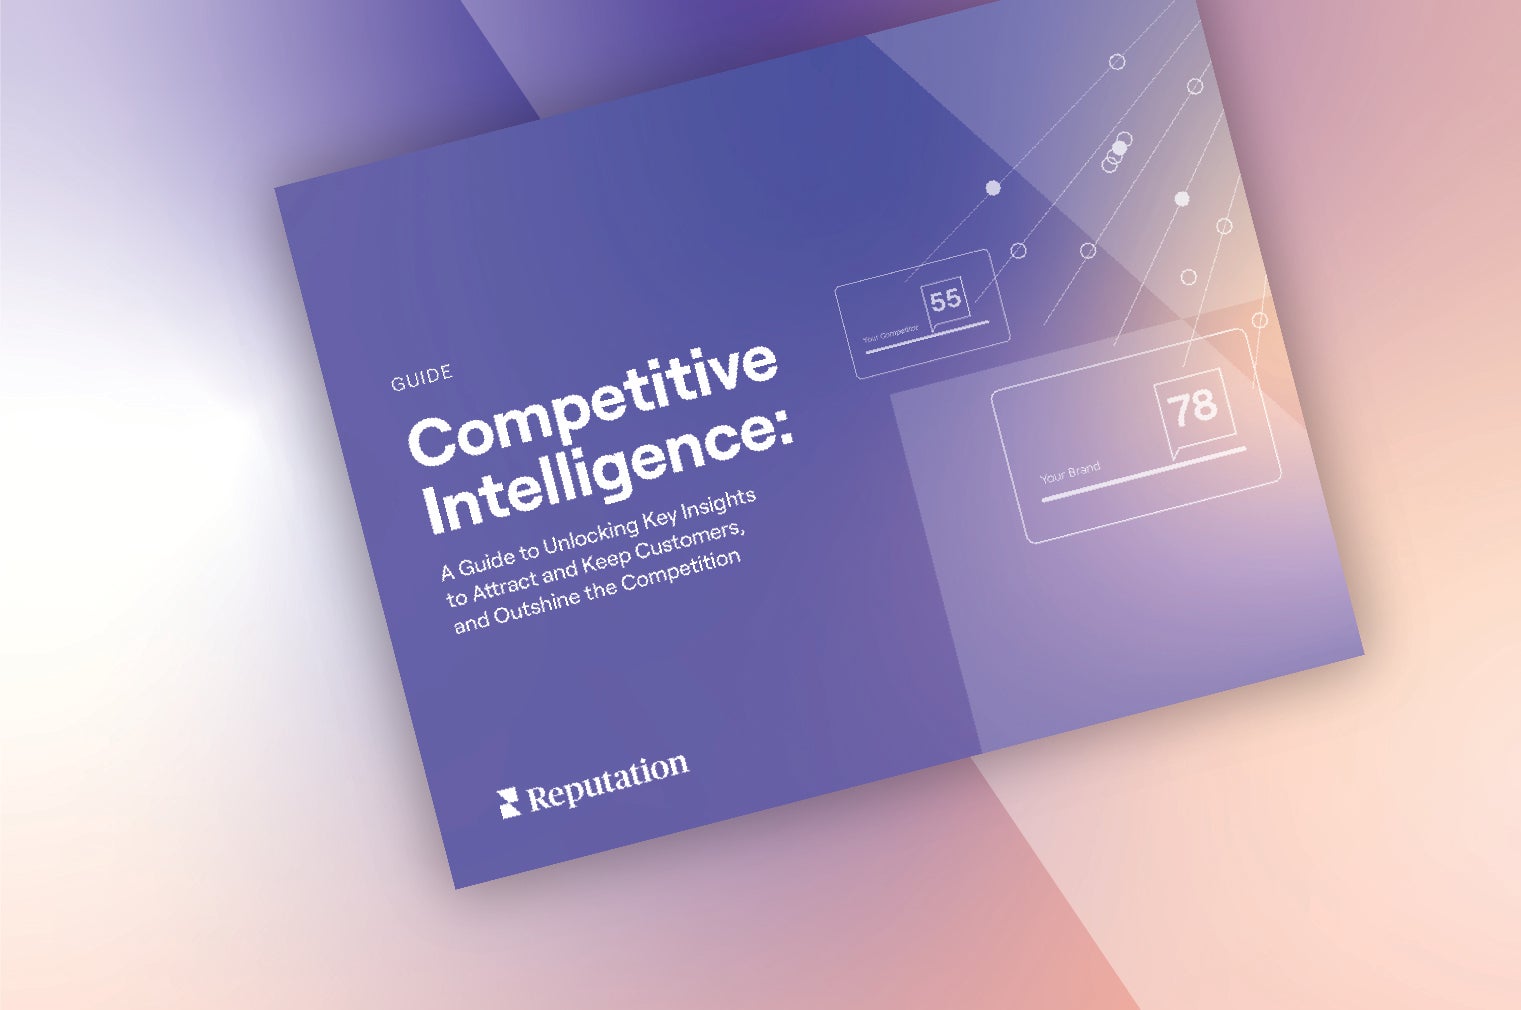 Image for Competitive Intelligence: A Guide to Unlocking Key Customer Insights to Stand Out From the Competition